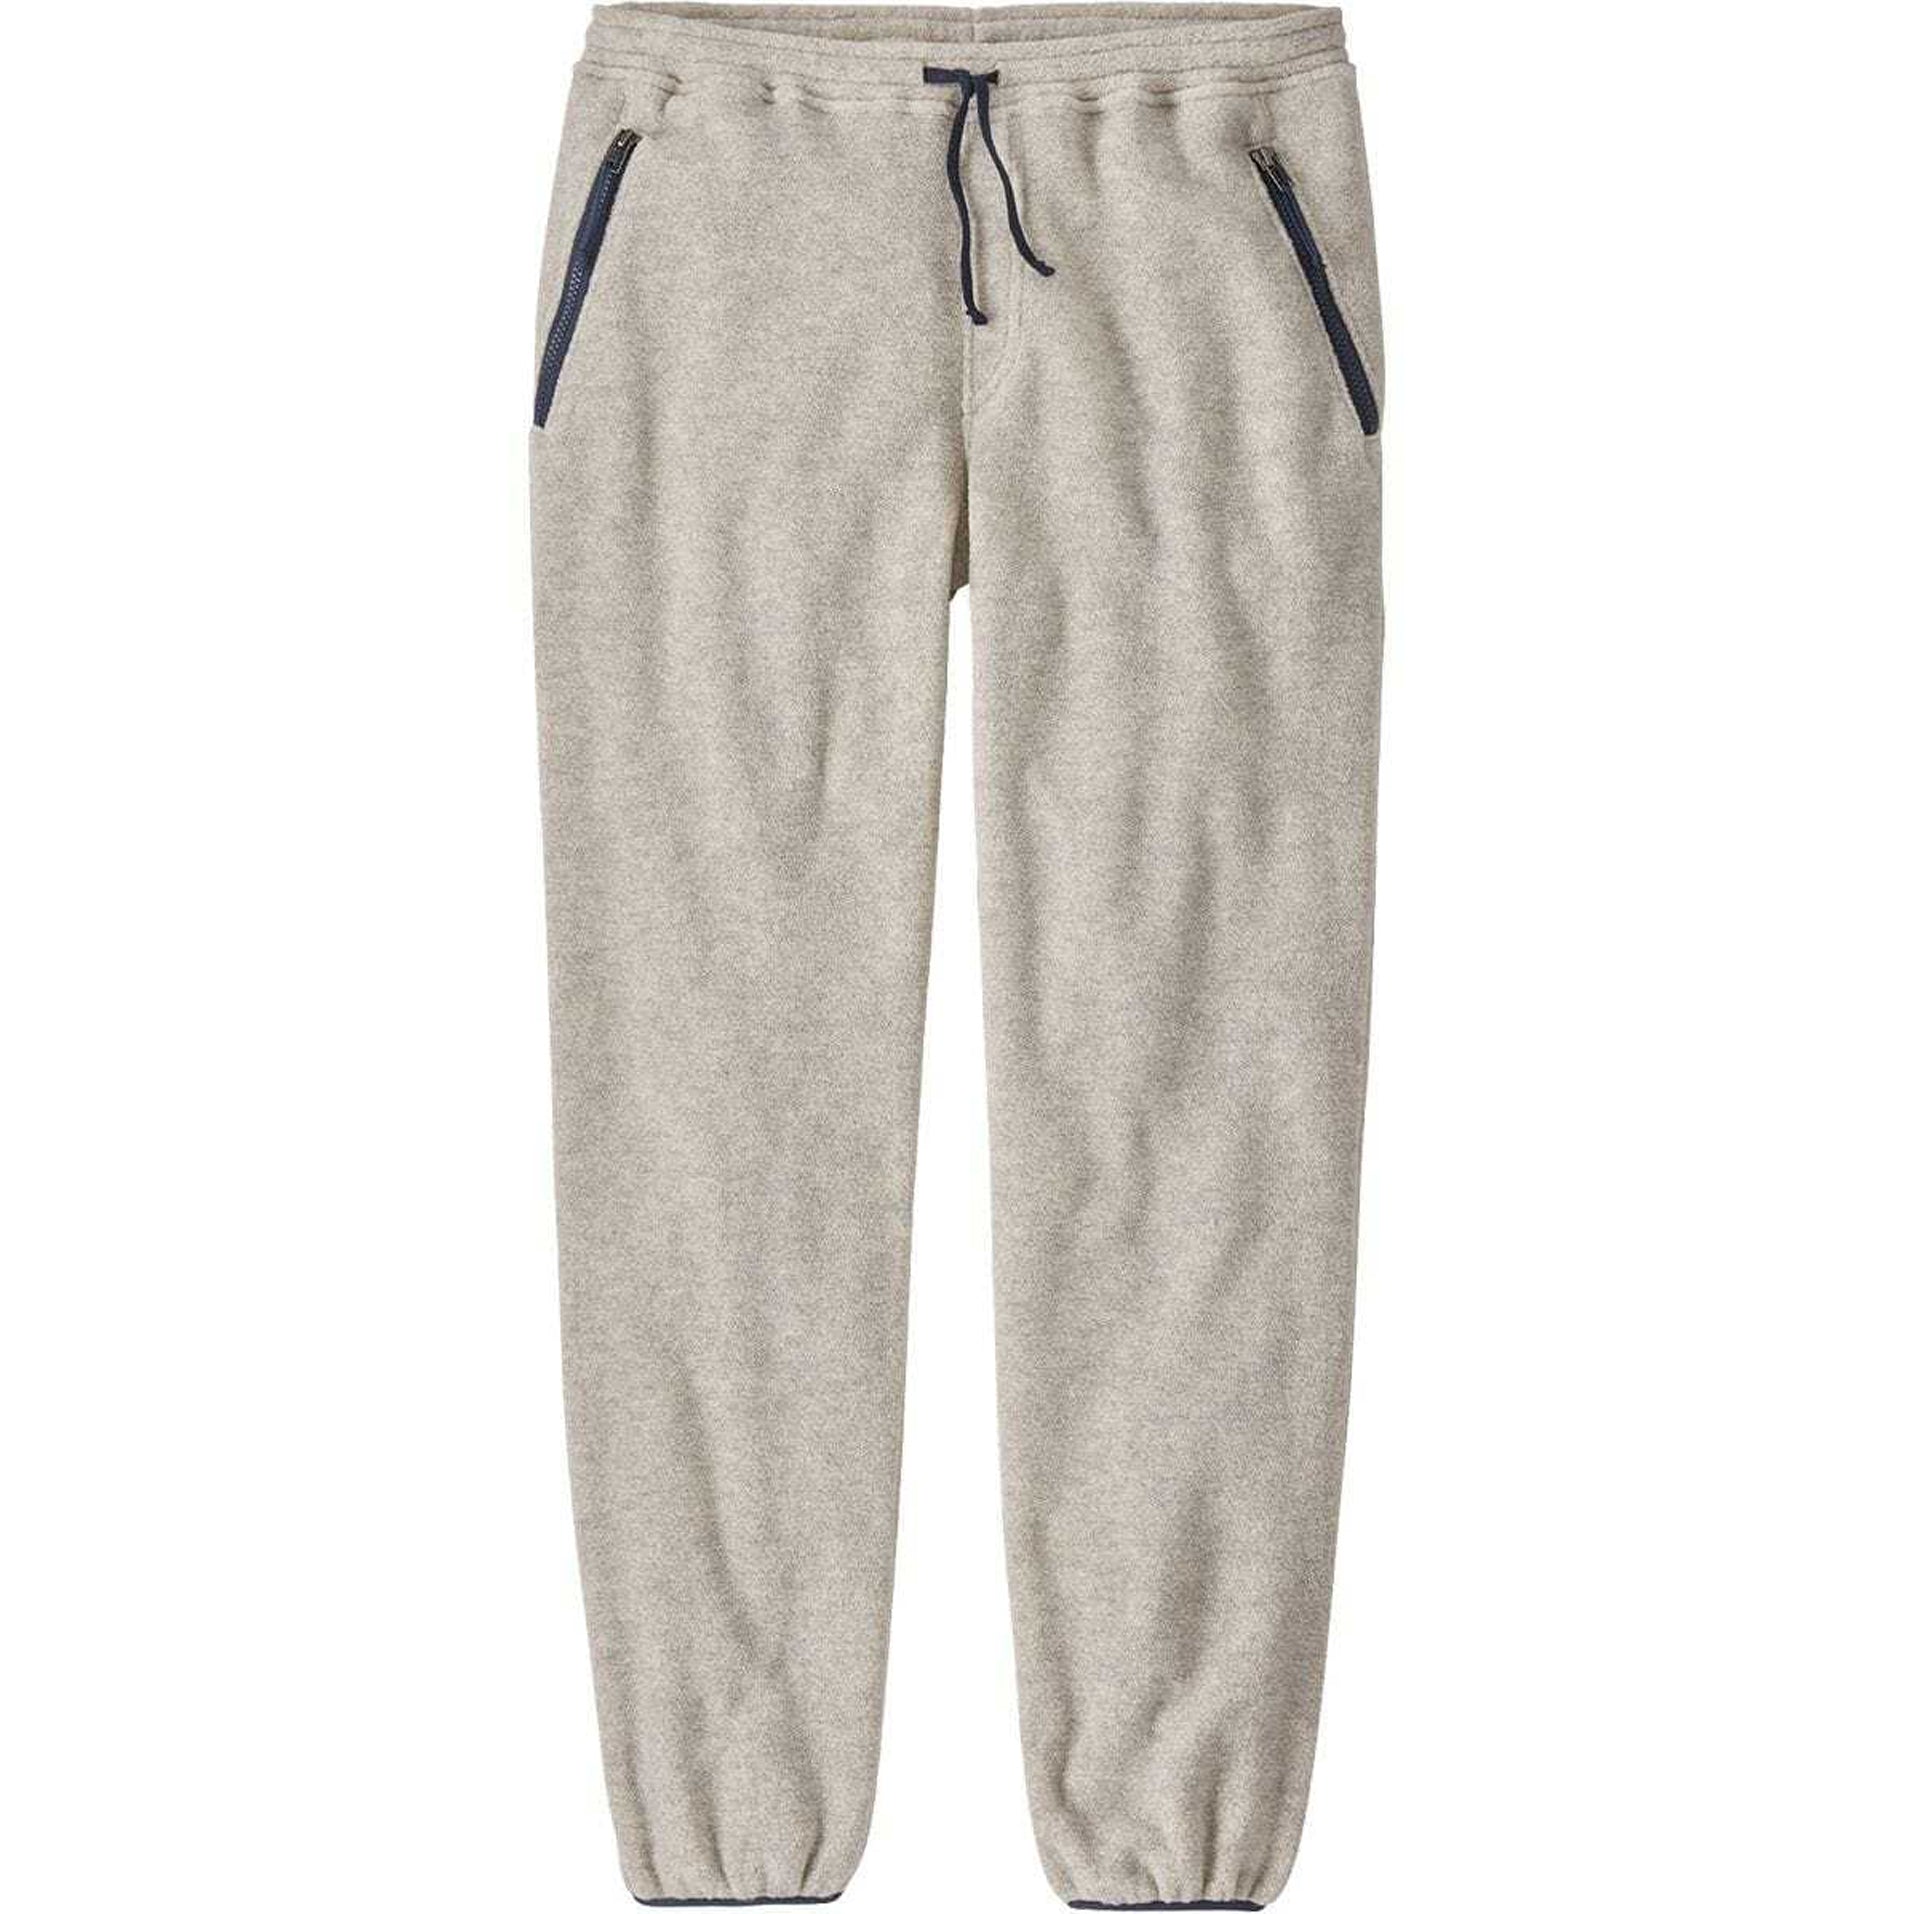 Synch Pants OATMEAL HEATHER
Warm, comfortable 100% recycled polyester fleece pants with a back pocket and an elasticized waistband. Inseam is 30&quot;. Fair Trade Certified™ sewn. PATAGONIA